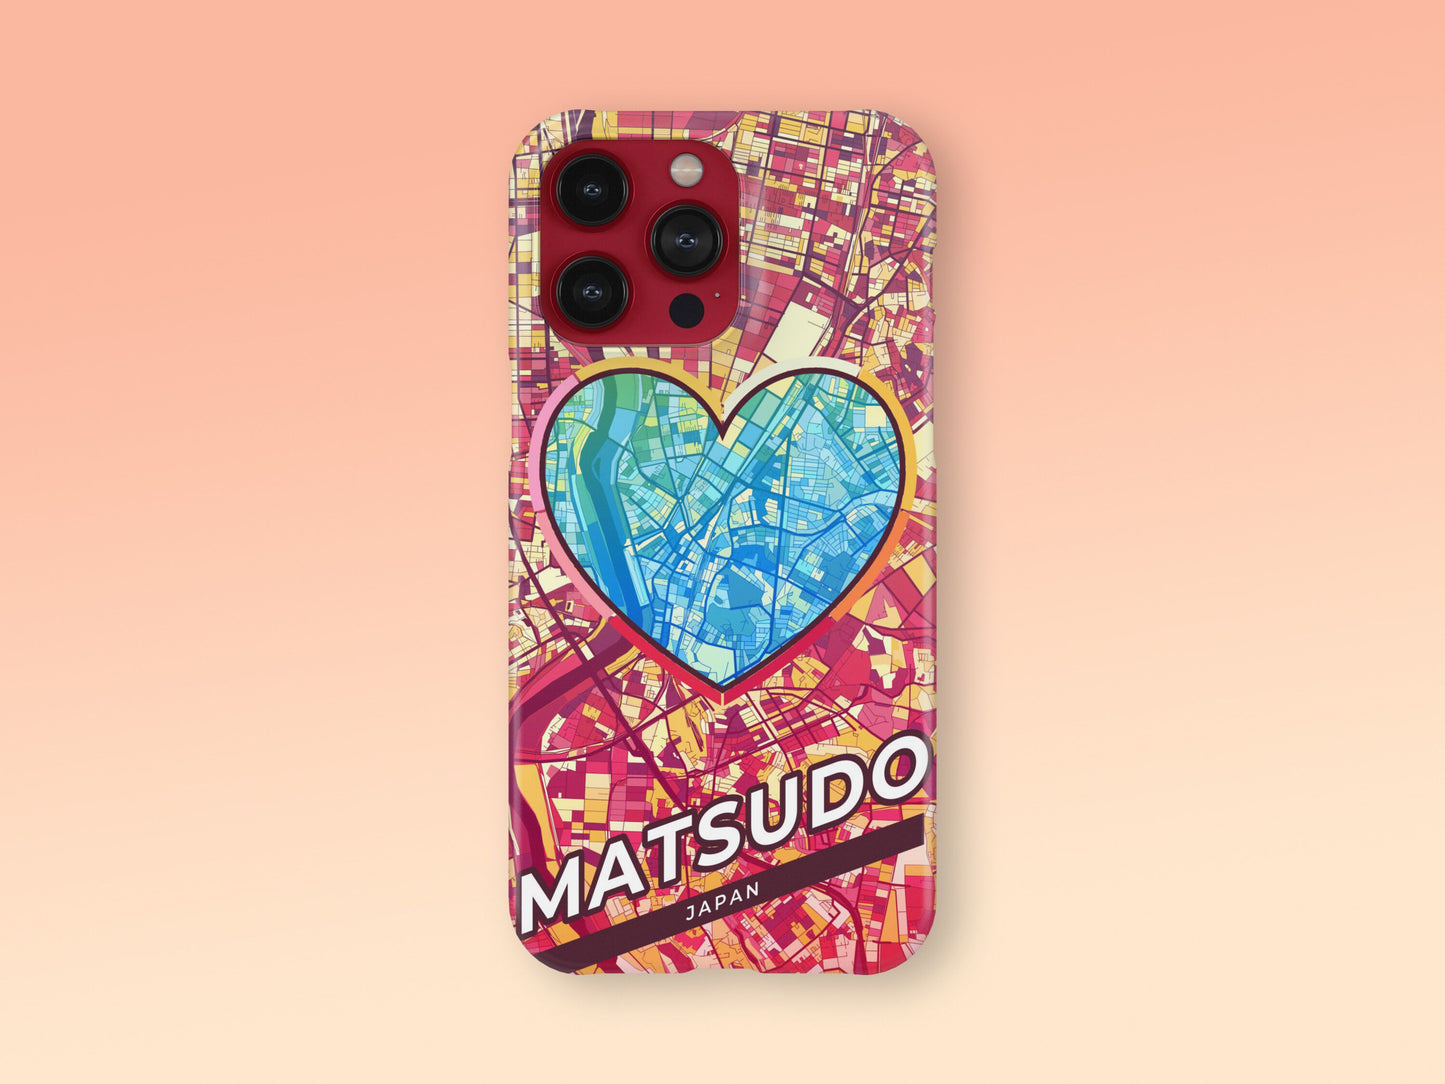 Matsudo Japan slim phone case with colorful icon. Birthday, wedding or housewarming gift. Couple match cases. 2